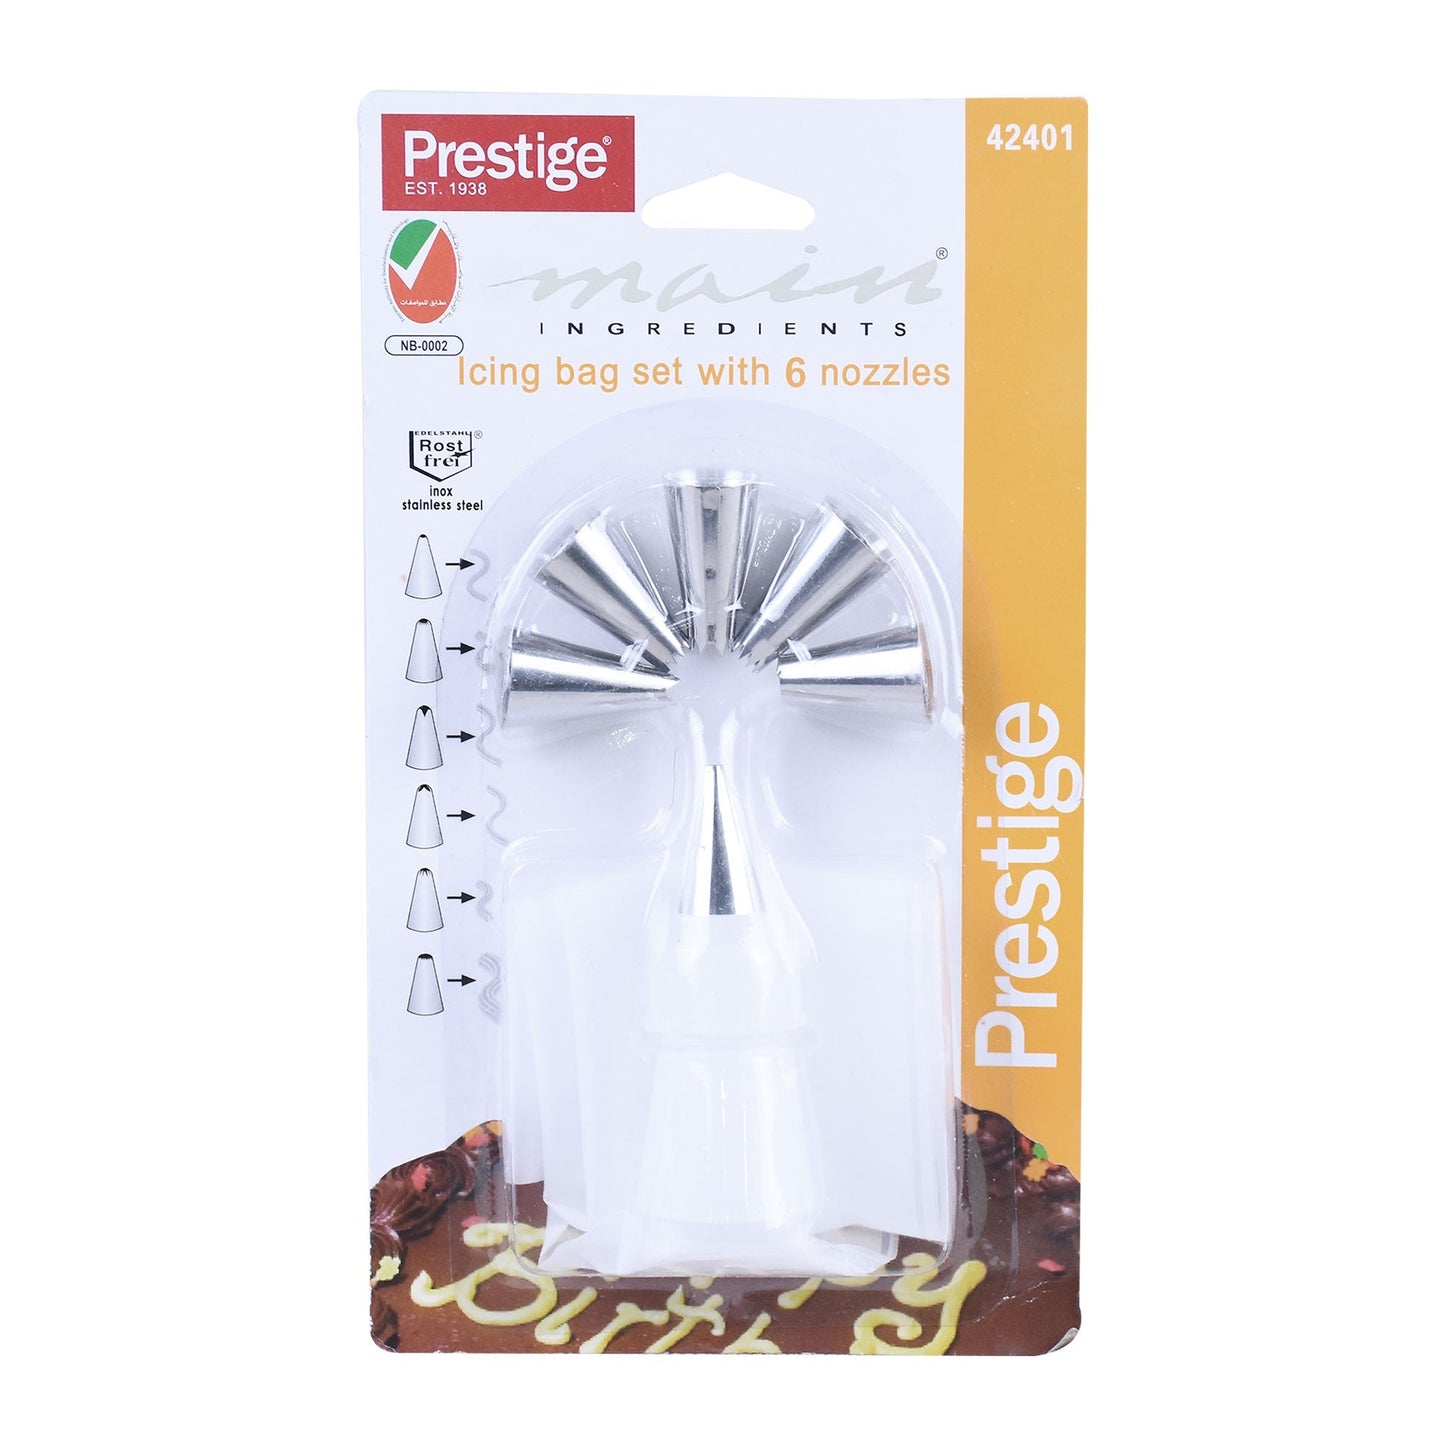 Prestige Icing Bag With 6 Nozzles